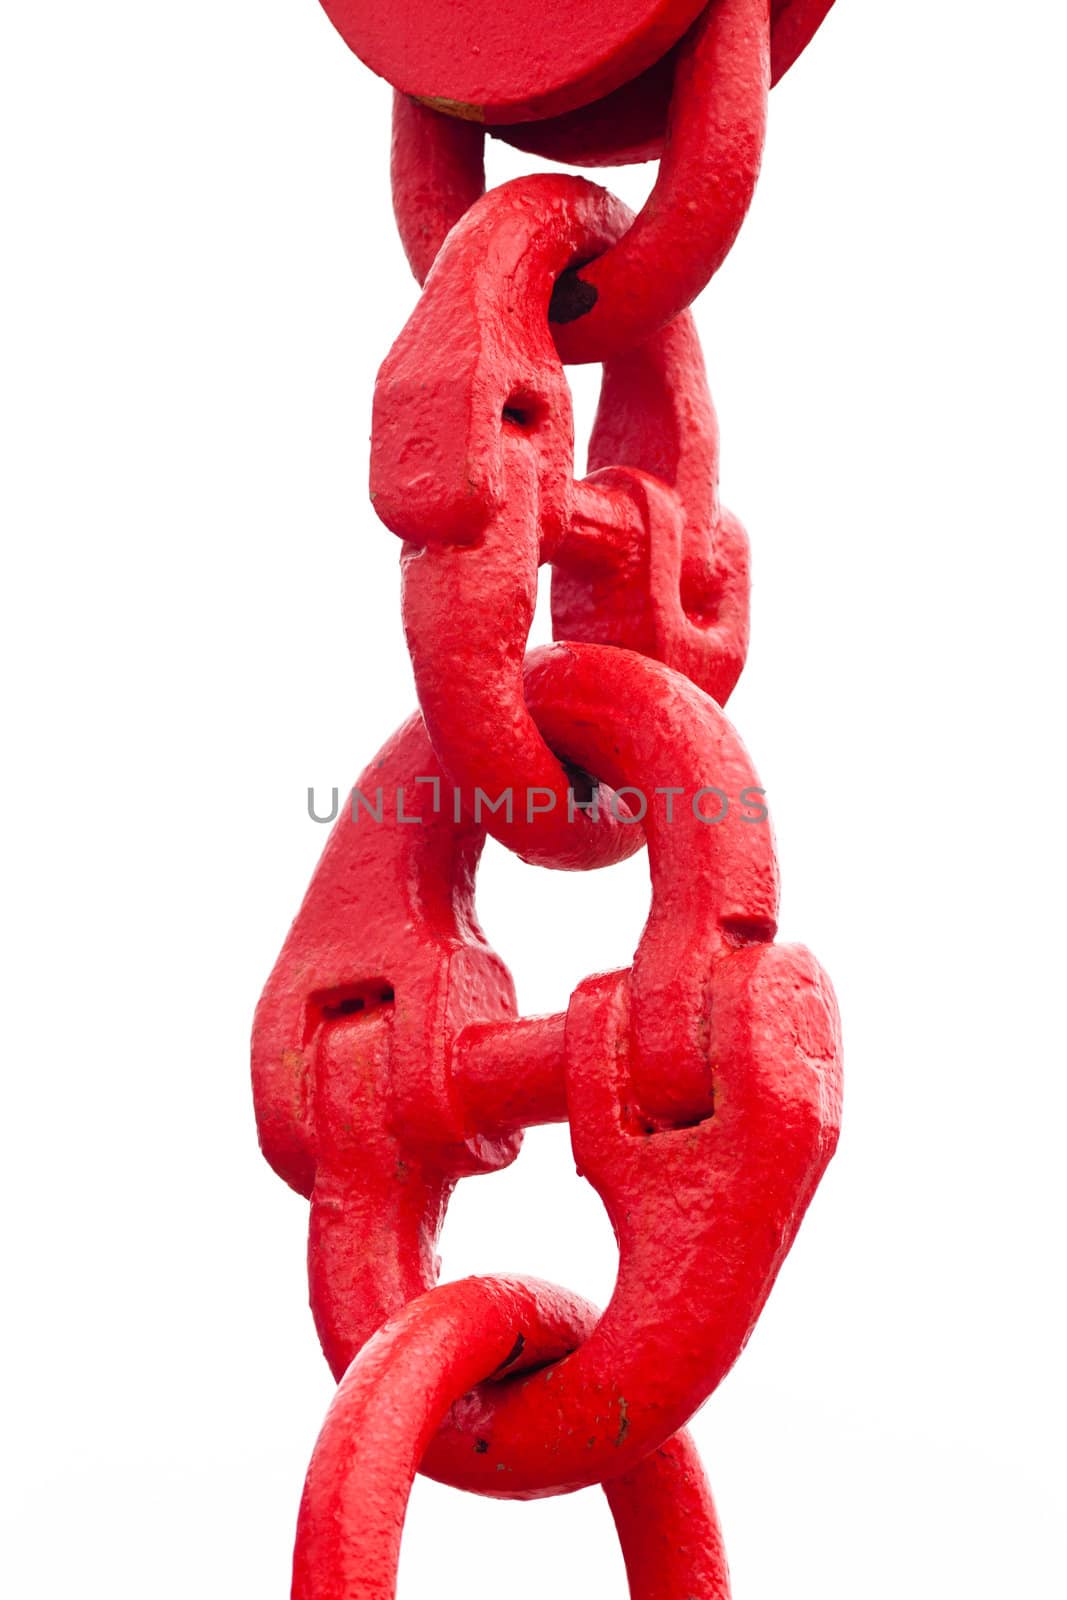 Close up shot of big painted red chain links isolated on white background